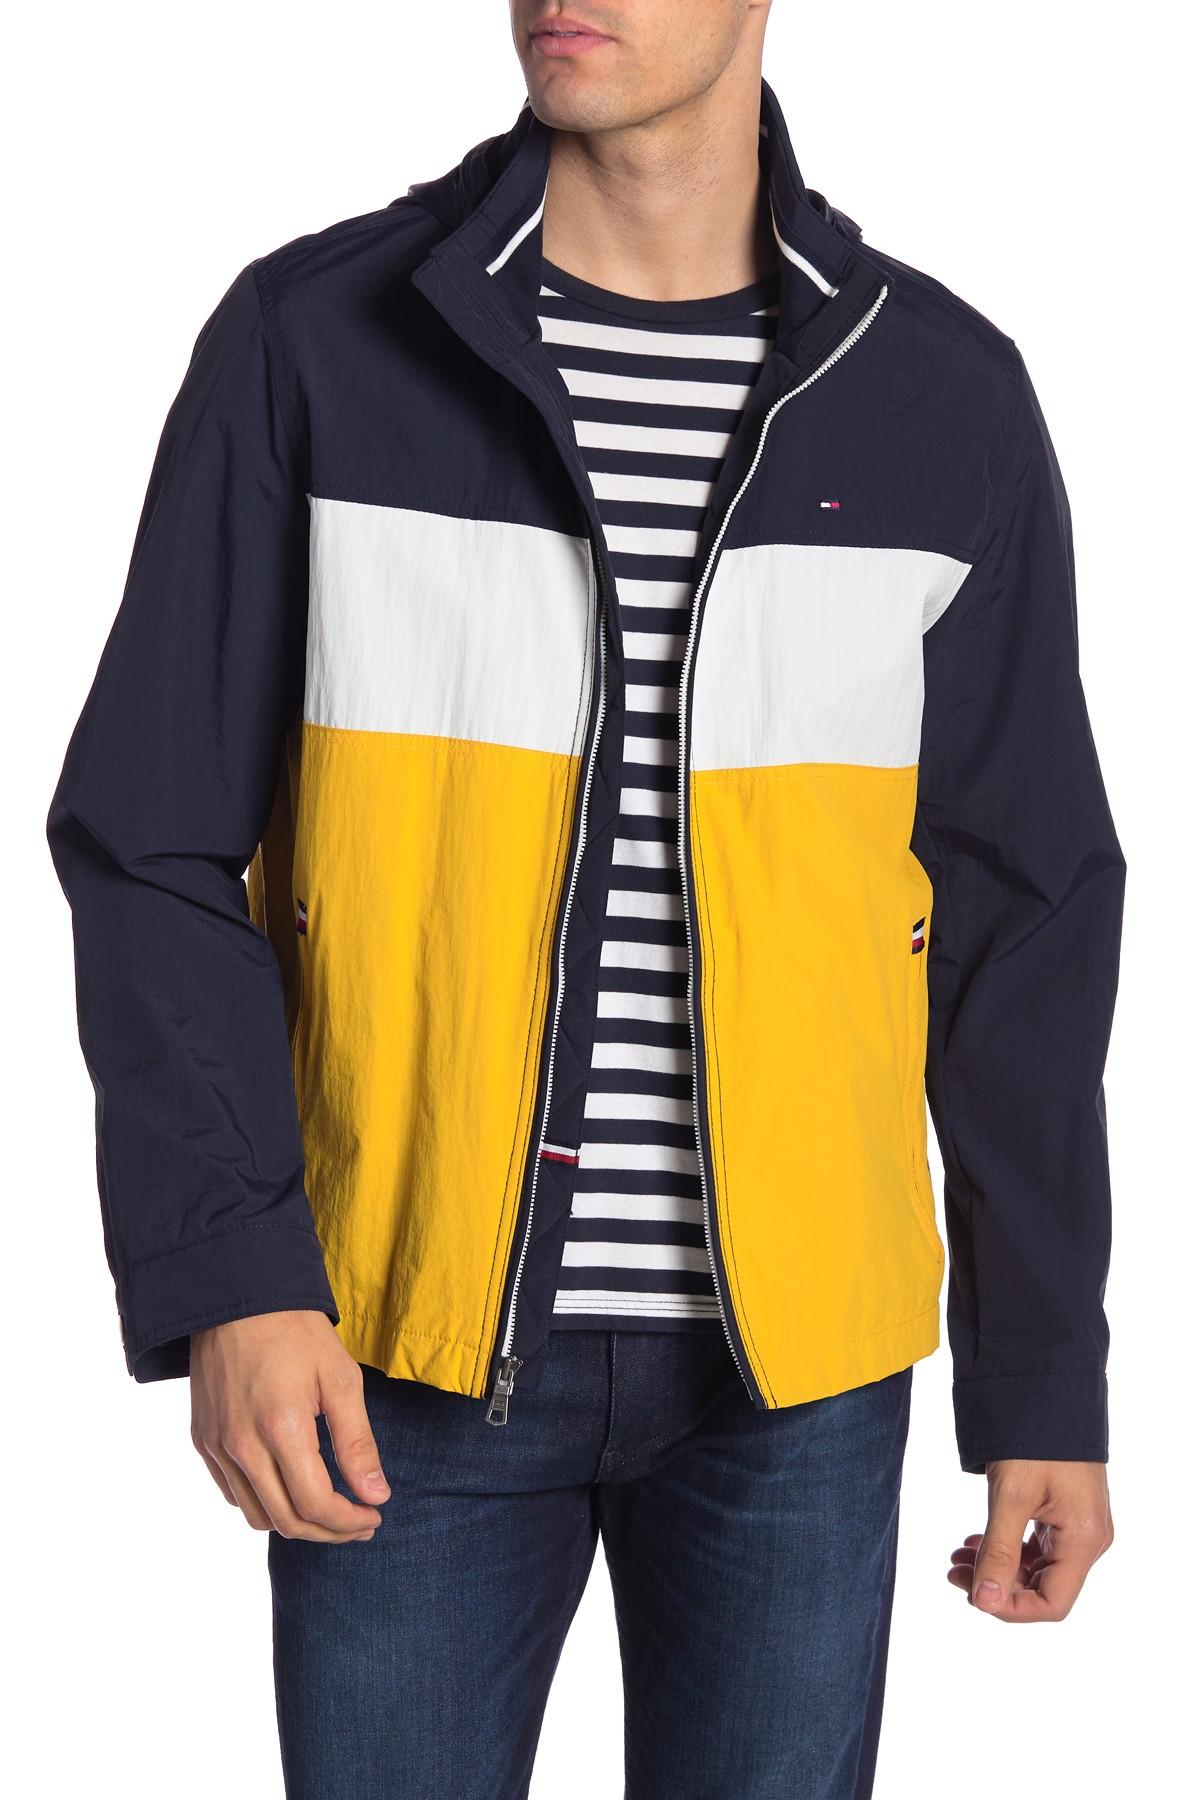 Tommy Hilfiger Synthetic Colorblock Yachting Jacket in Navy/White/Yellow ( Blue) for Men - Lyst